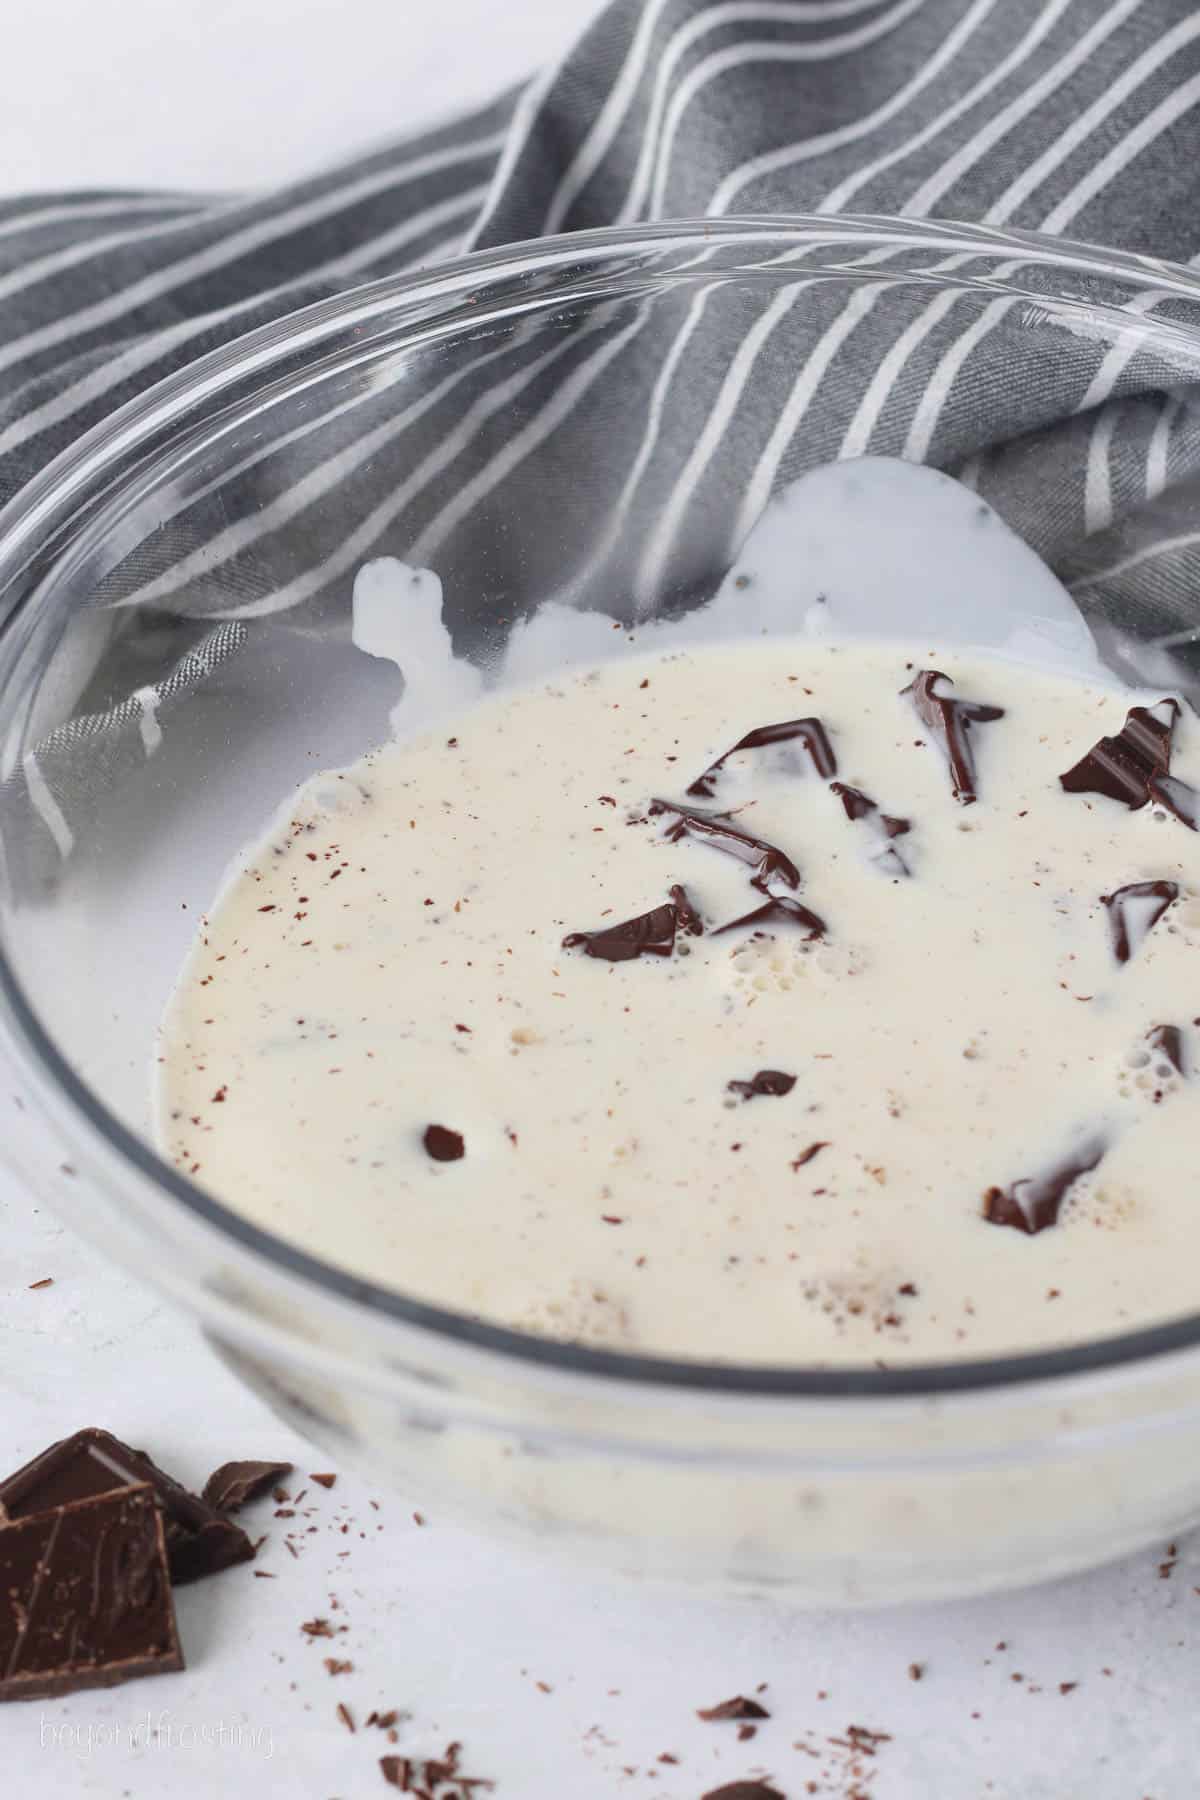 Heated heavy cream combined with chopped chocolate in a glass bowl.